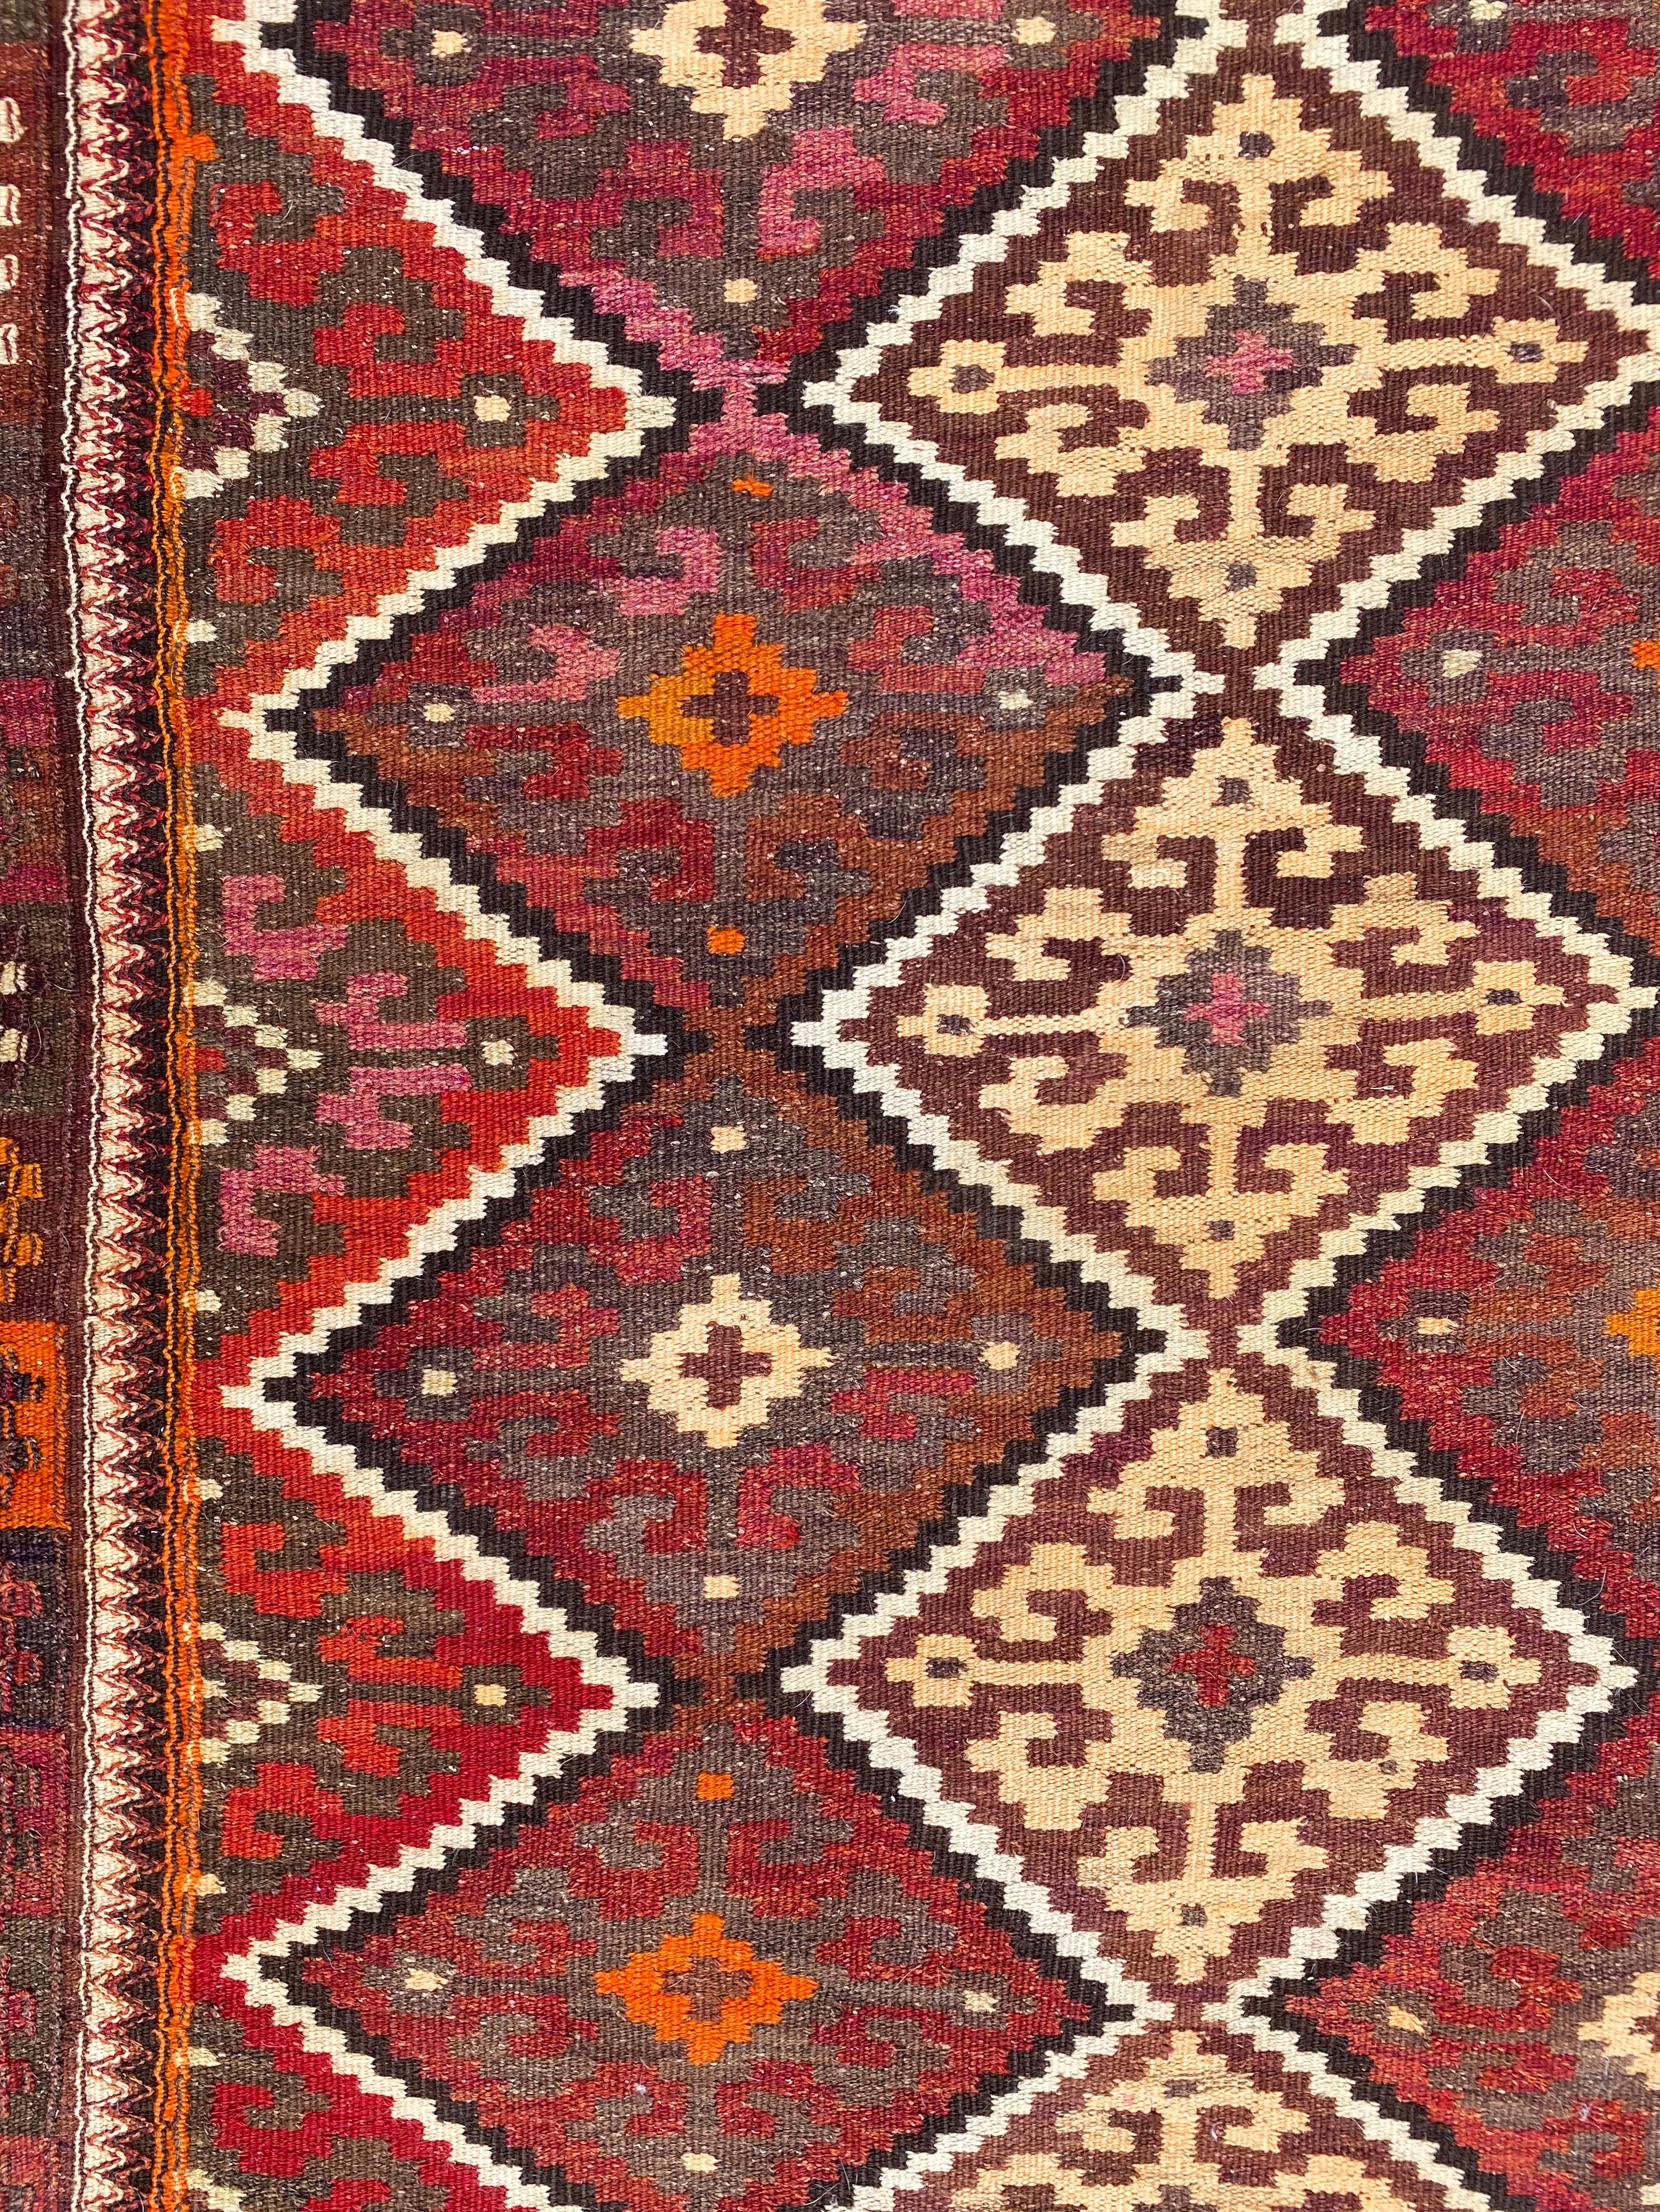 This Antique Uzbekistan Tartari Kilim was crafted from the prolific and diverse Uzbek weavers of Sar-i-Pul. It was crafted using a distinct weave double-interlock technique and employs a grid pattern of diamonds shapes that contain eight pointed